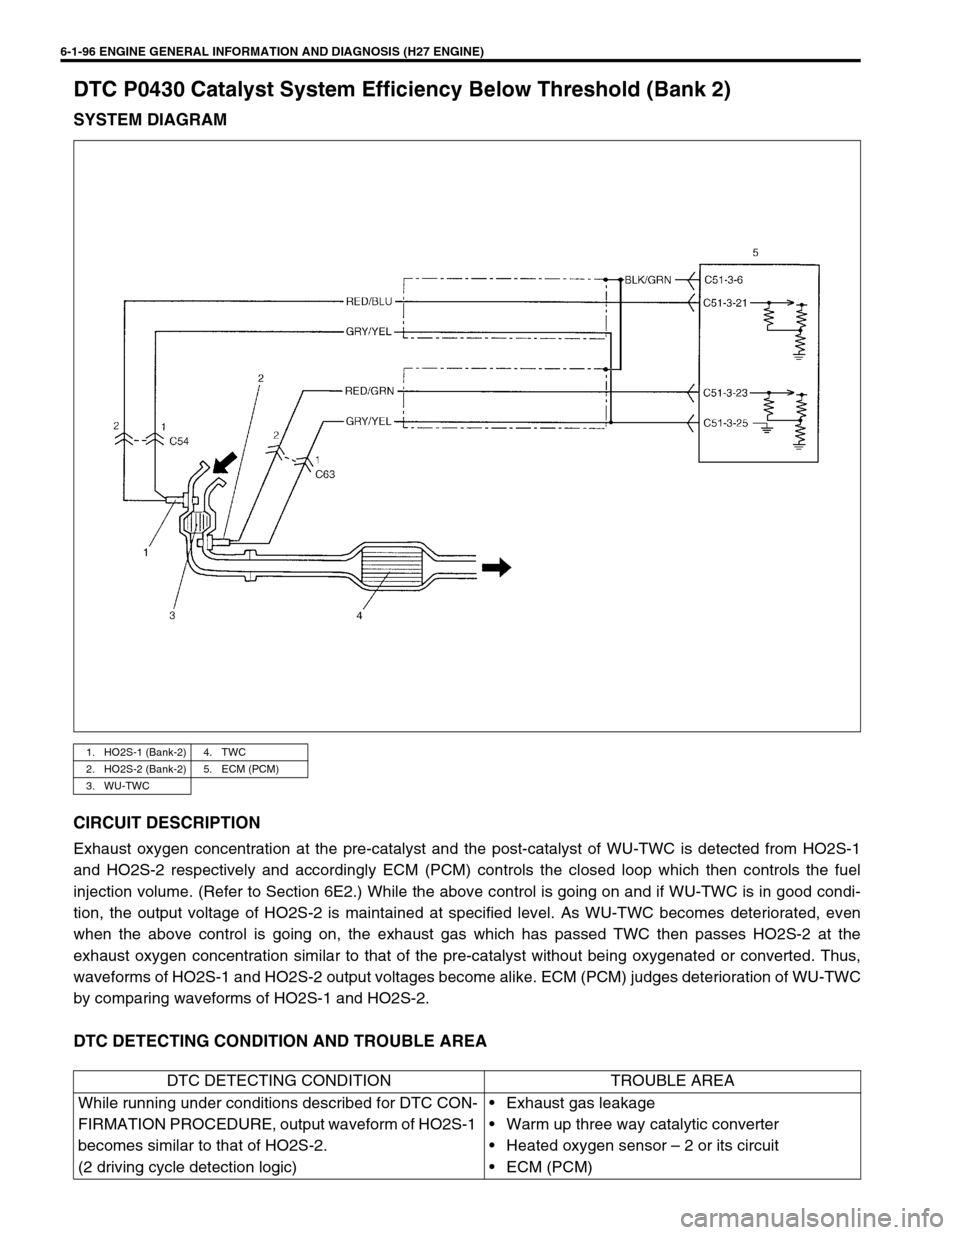 SUZUKI GRAND VITARA 1999 2.G Owners Manual 6-1-96 ENGINE GENERAL INFORMATION AND DIAGNOSIS (H27 ENGINE)
DTC P0430 Catalyst System Efficiency Below Threshold (Bank 2)
SYSTEM DIAGRAM
CIRCUIT DESCRIPTION
Exhaust oxygen concentration at the pre-ca